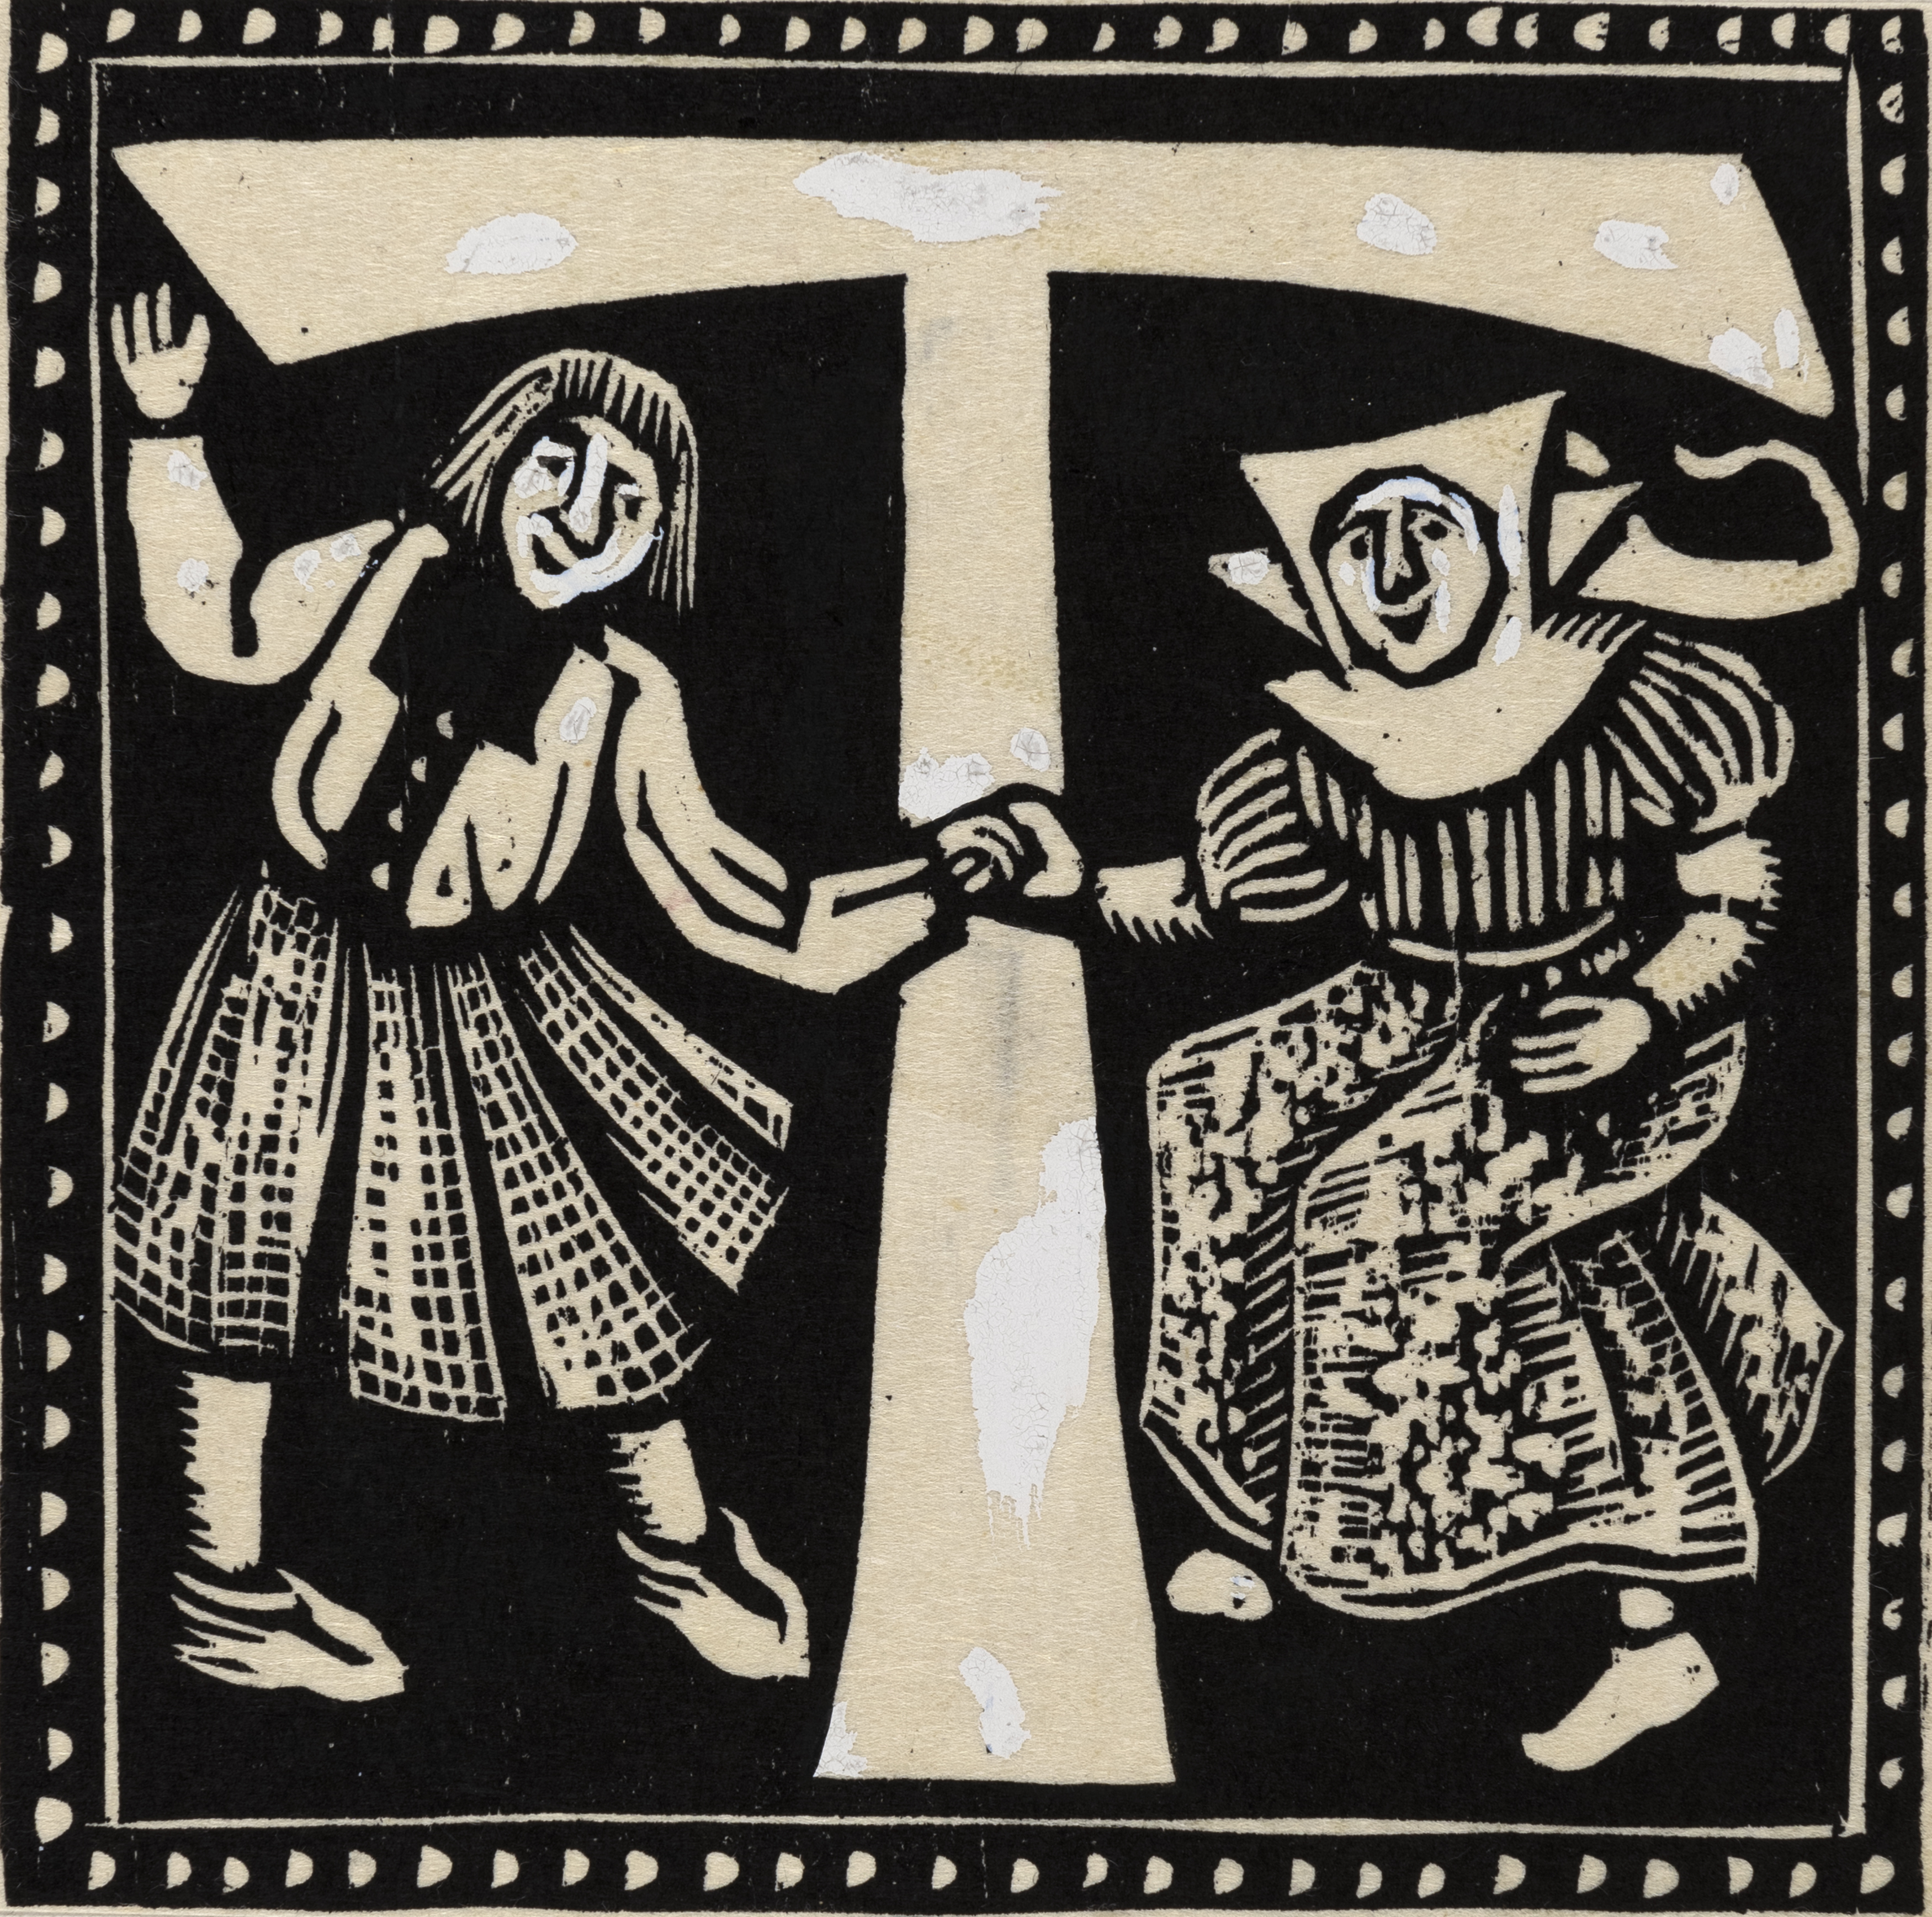 Illustration of large letter "T" with two people dancing next to it. 